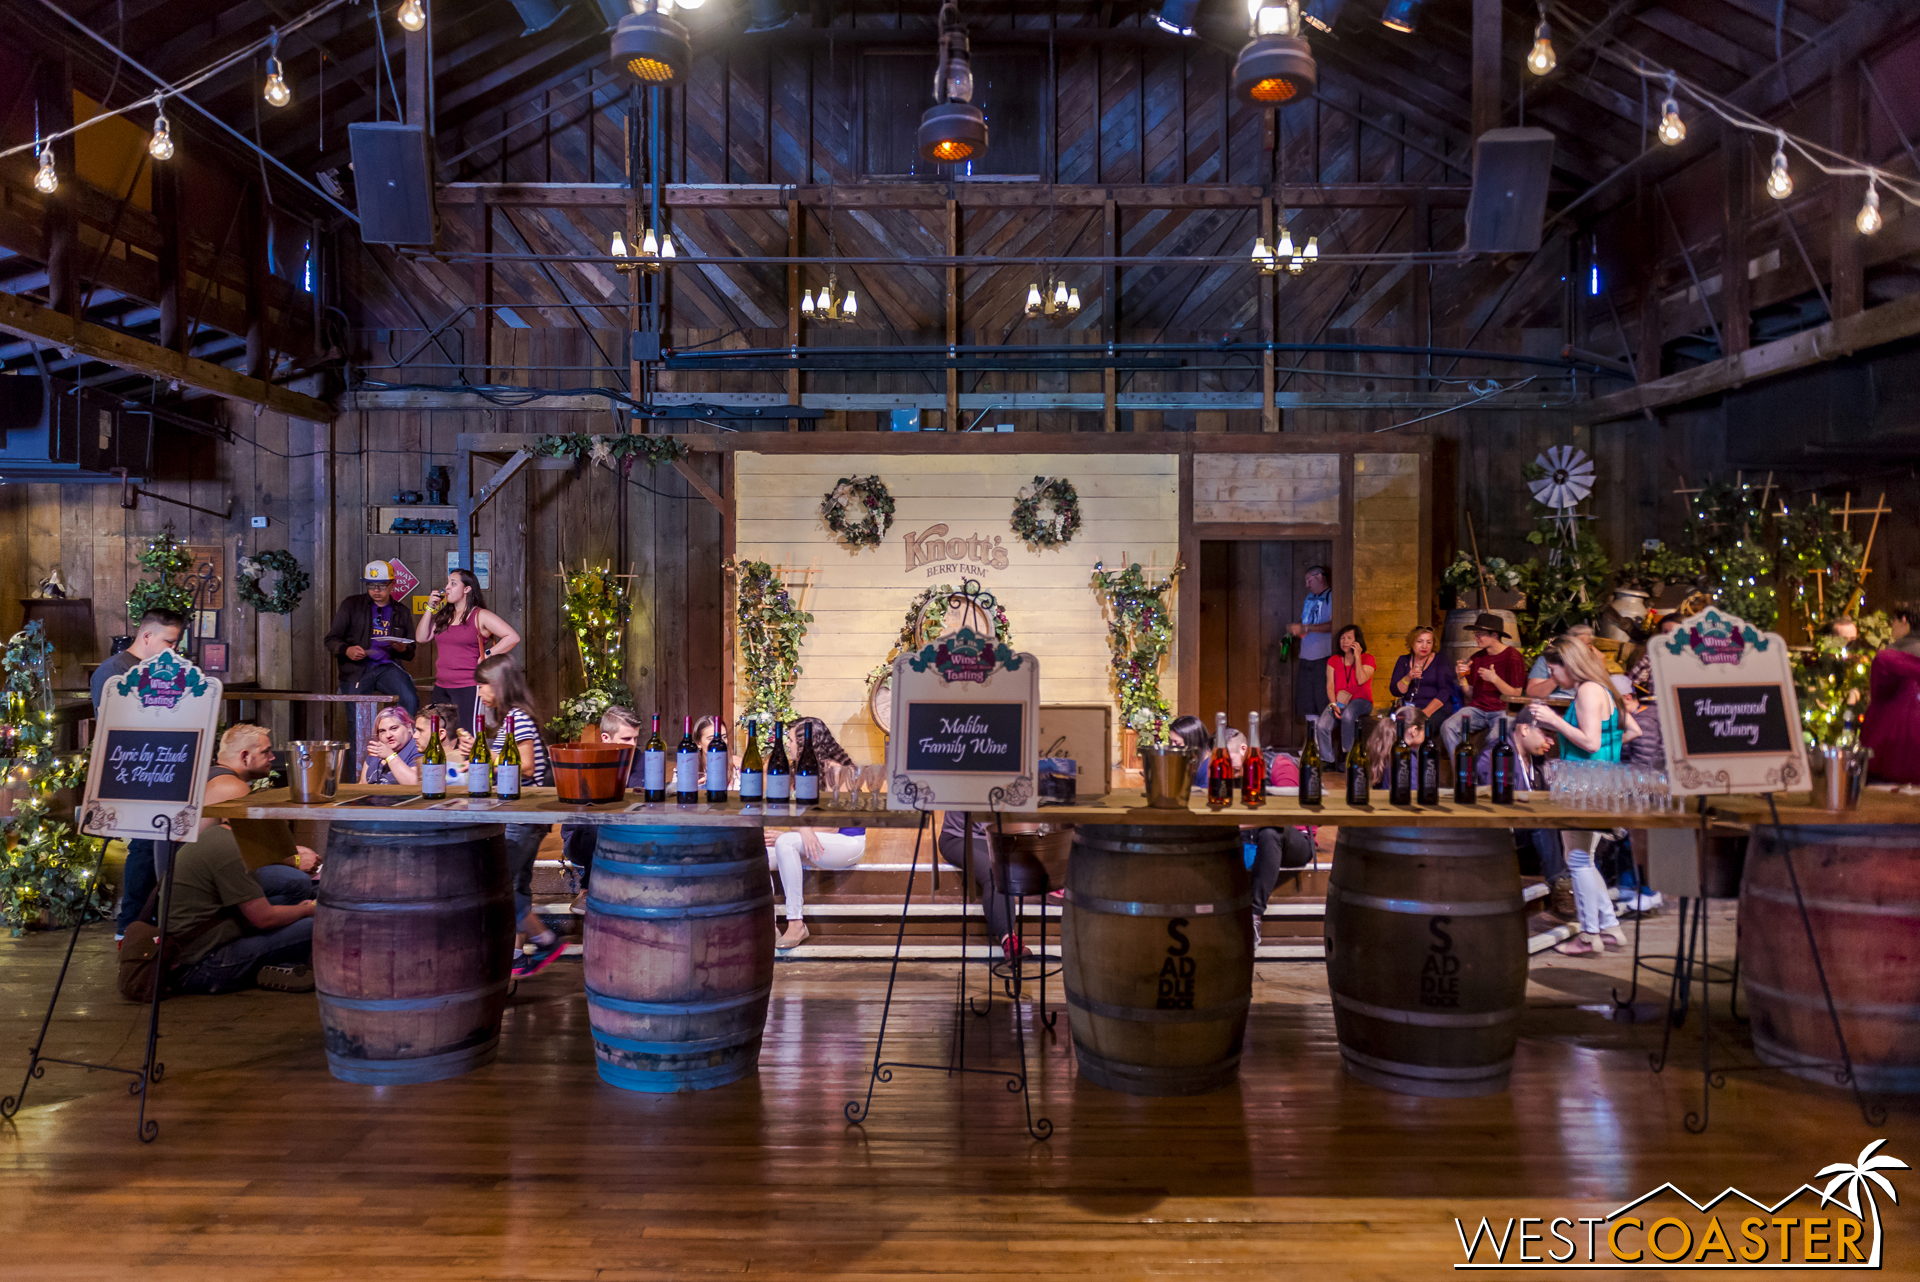  There's a nice setup inside the Wilderness Dance Hall for boozing. 